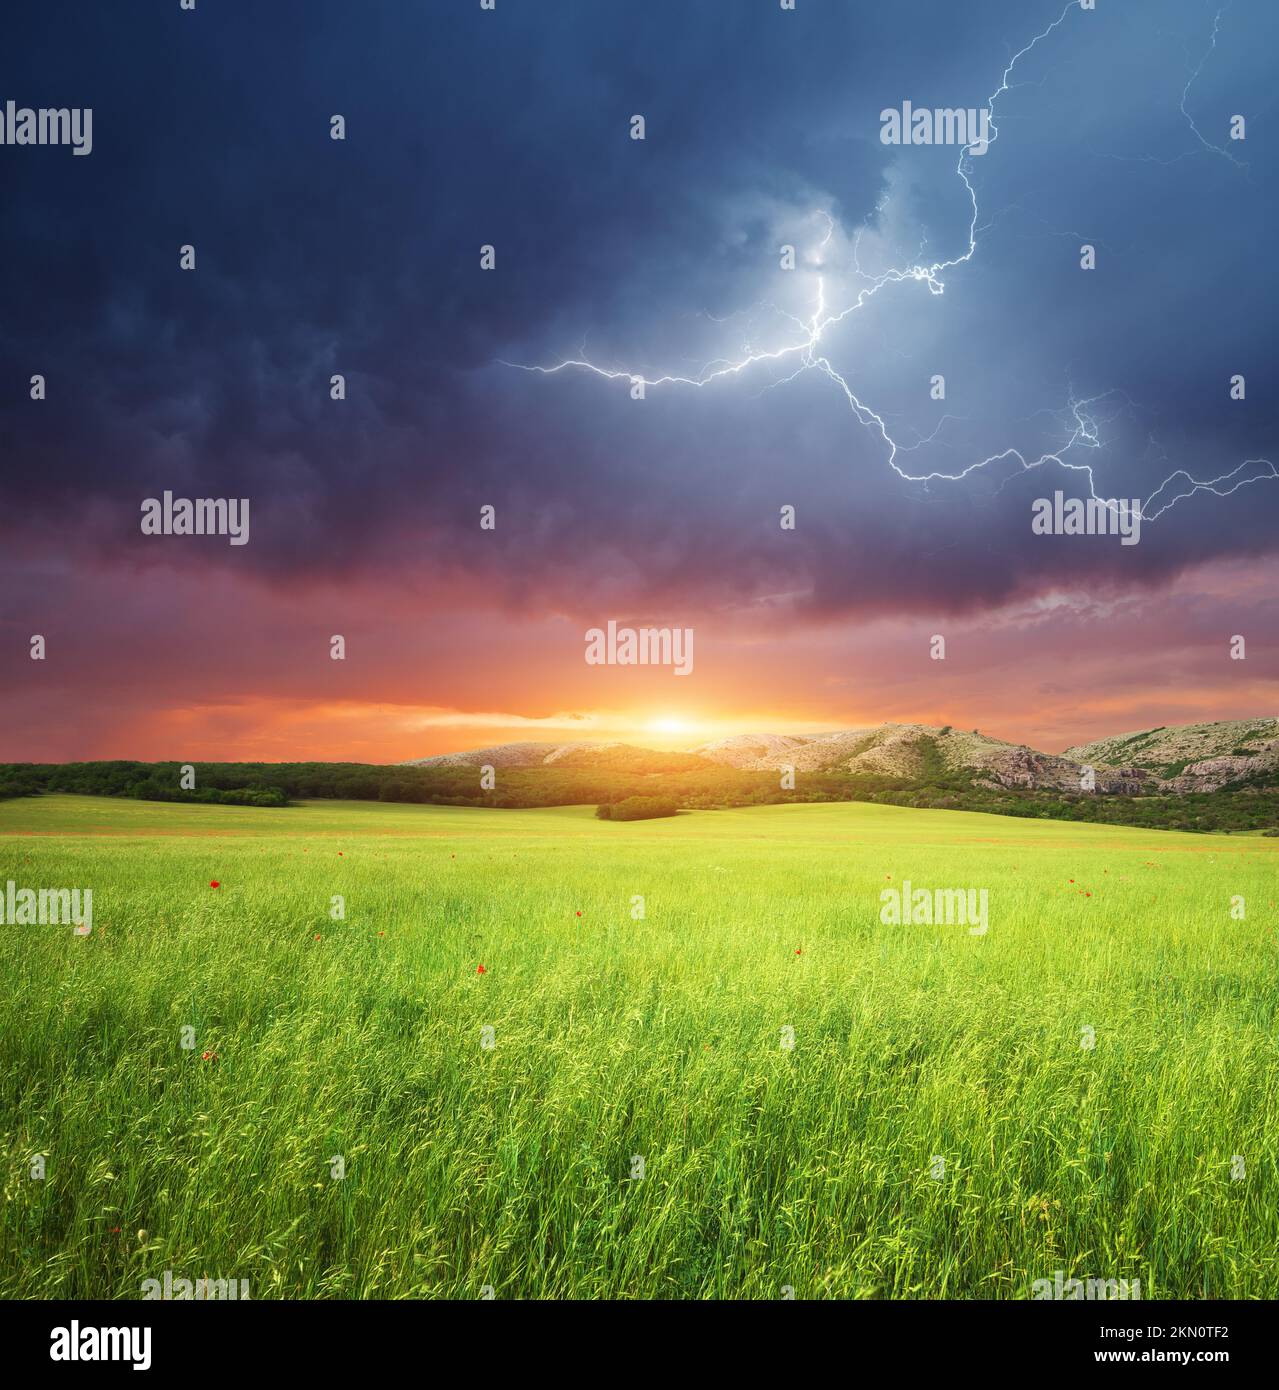 Green meadow in mountain. Sunset and lightning in spring green meadow. Composition of nature. Stock Photo